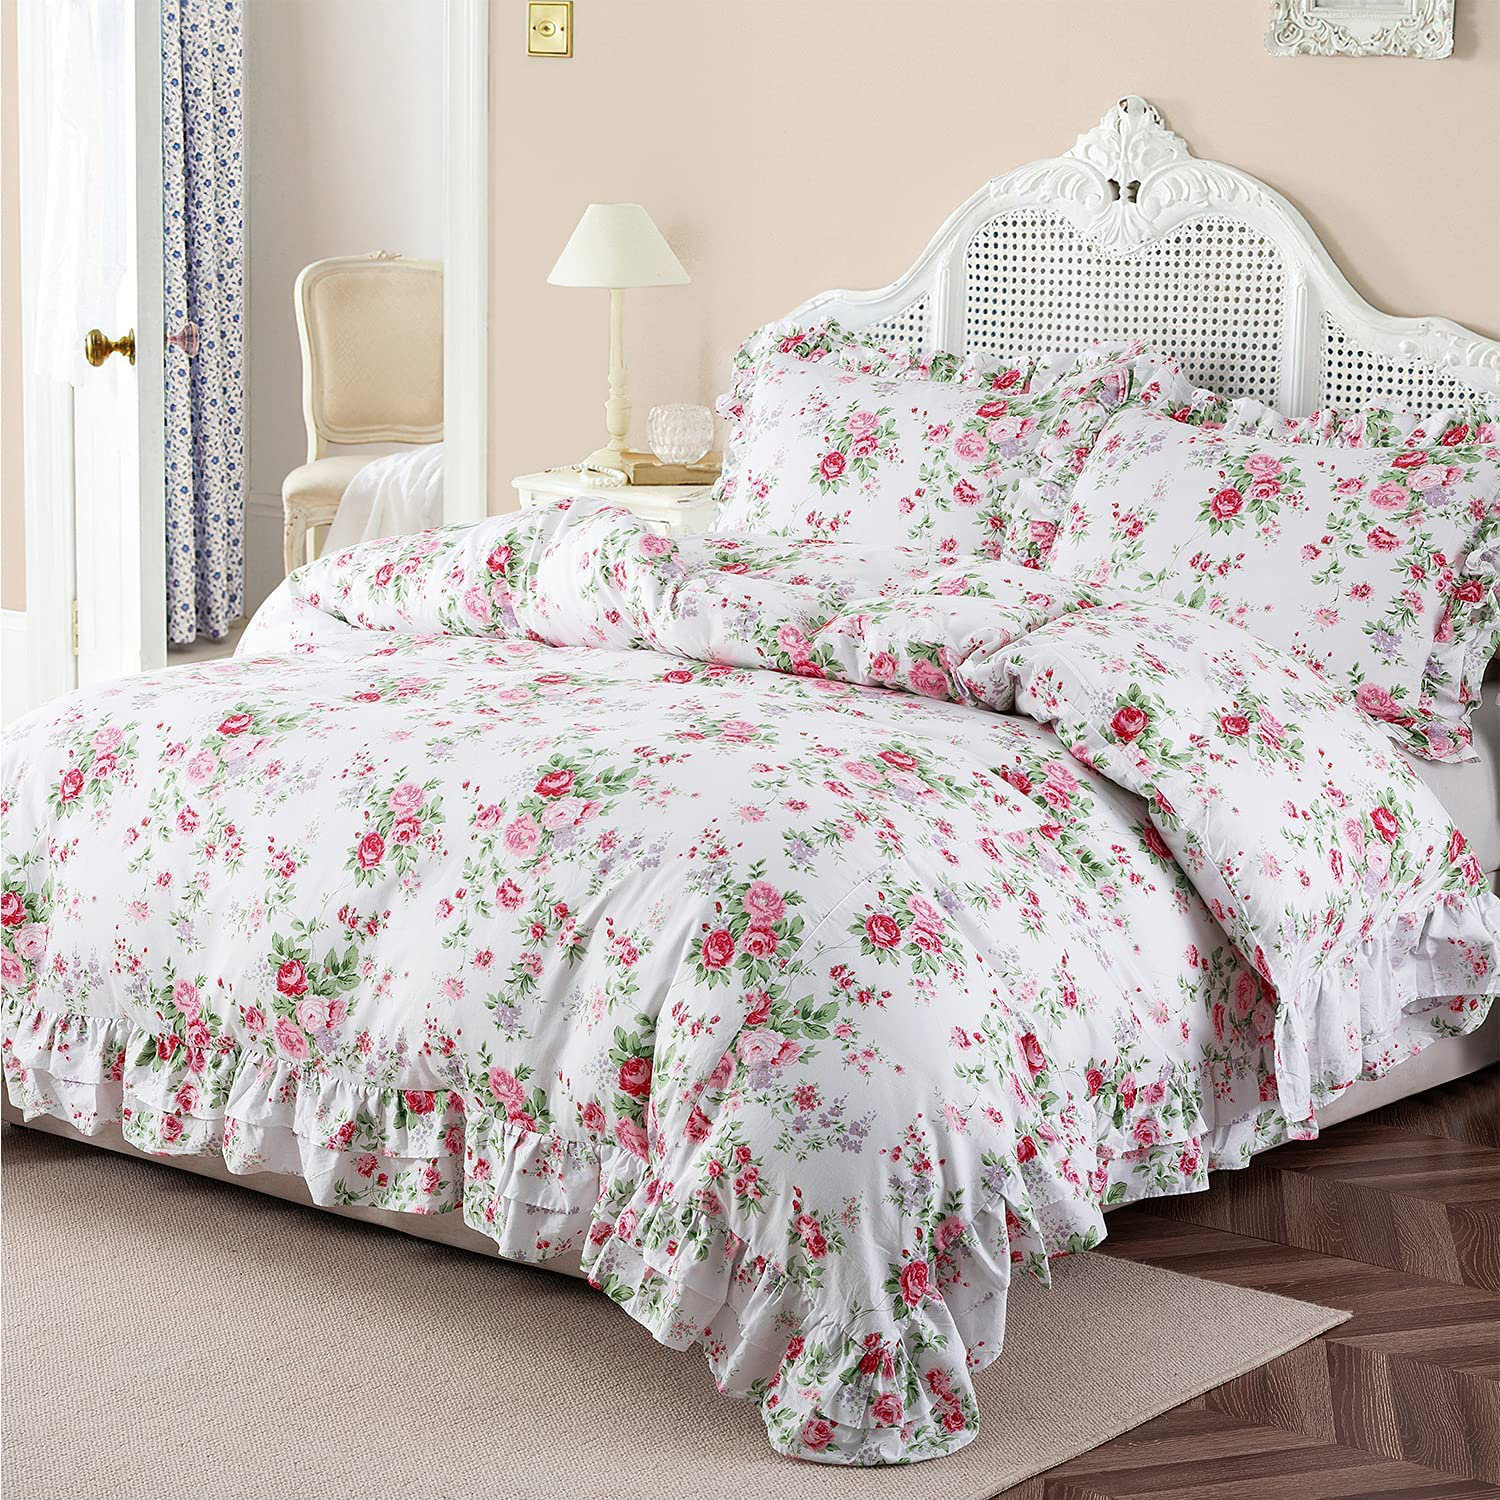 3PCS Shabby Chic Country Rose Quilt Coverlet Bedspread Queen Set 100% Cotton 